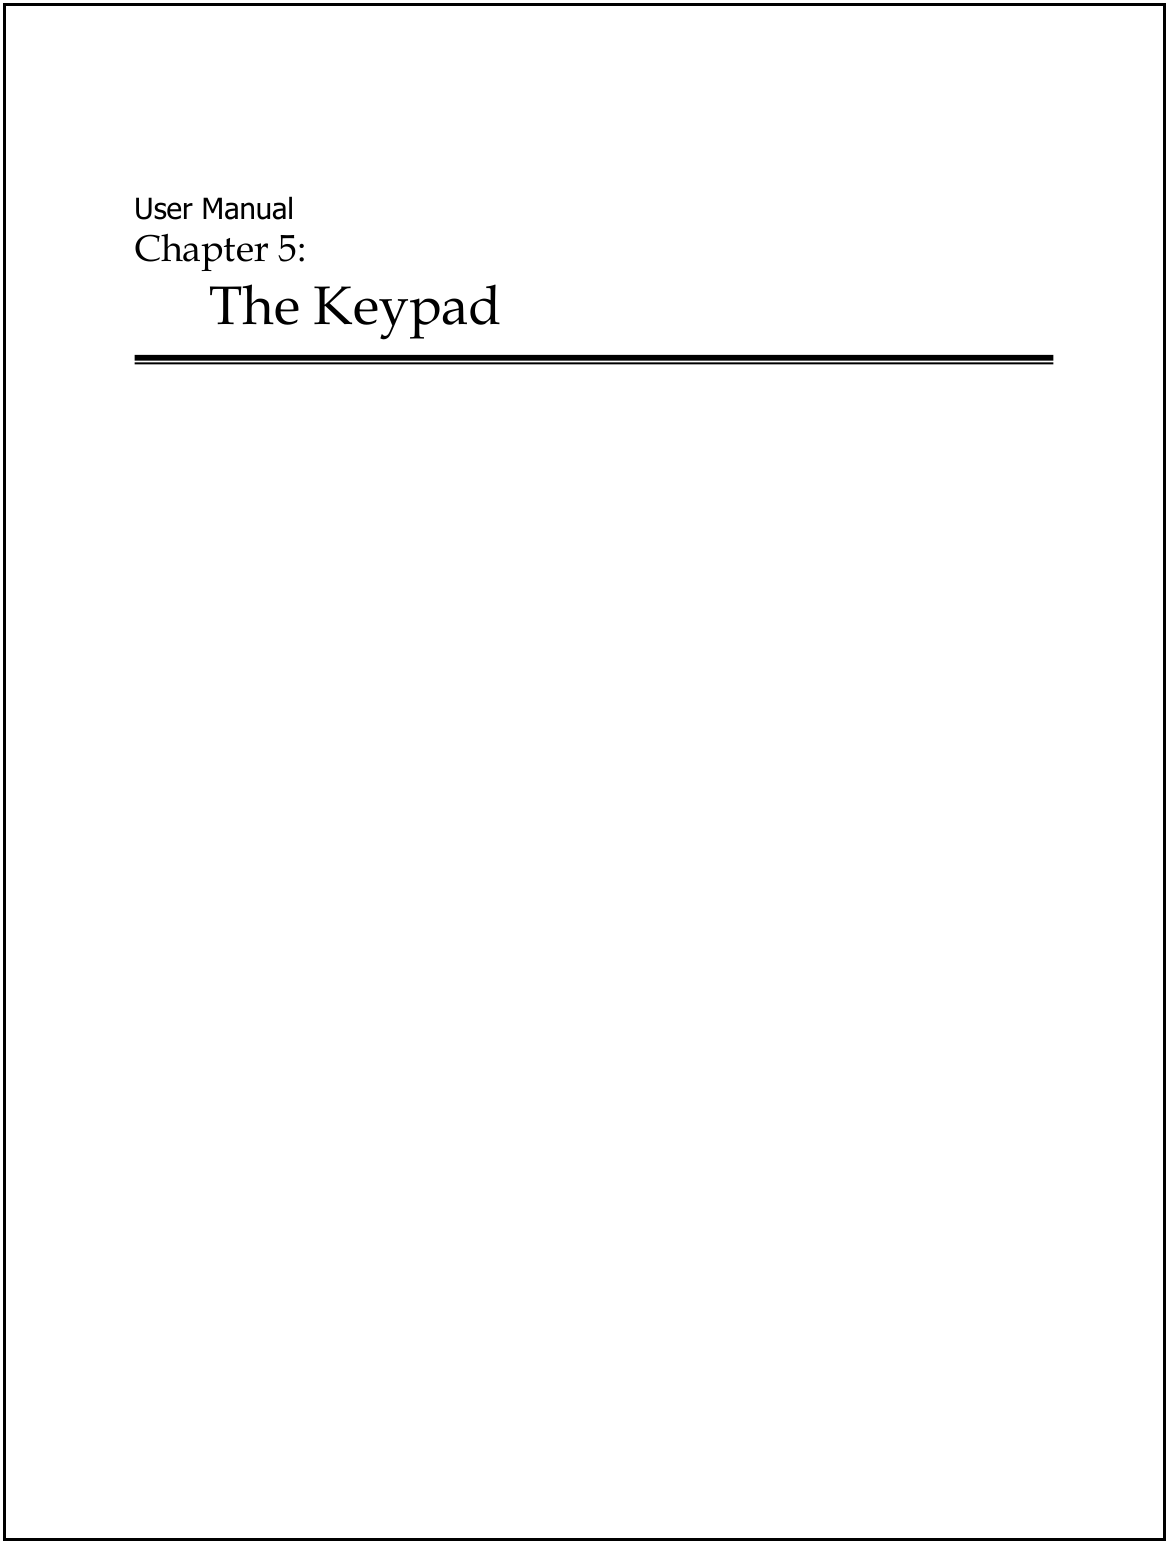  User Manual Chapter 5:  The Keypad      